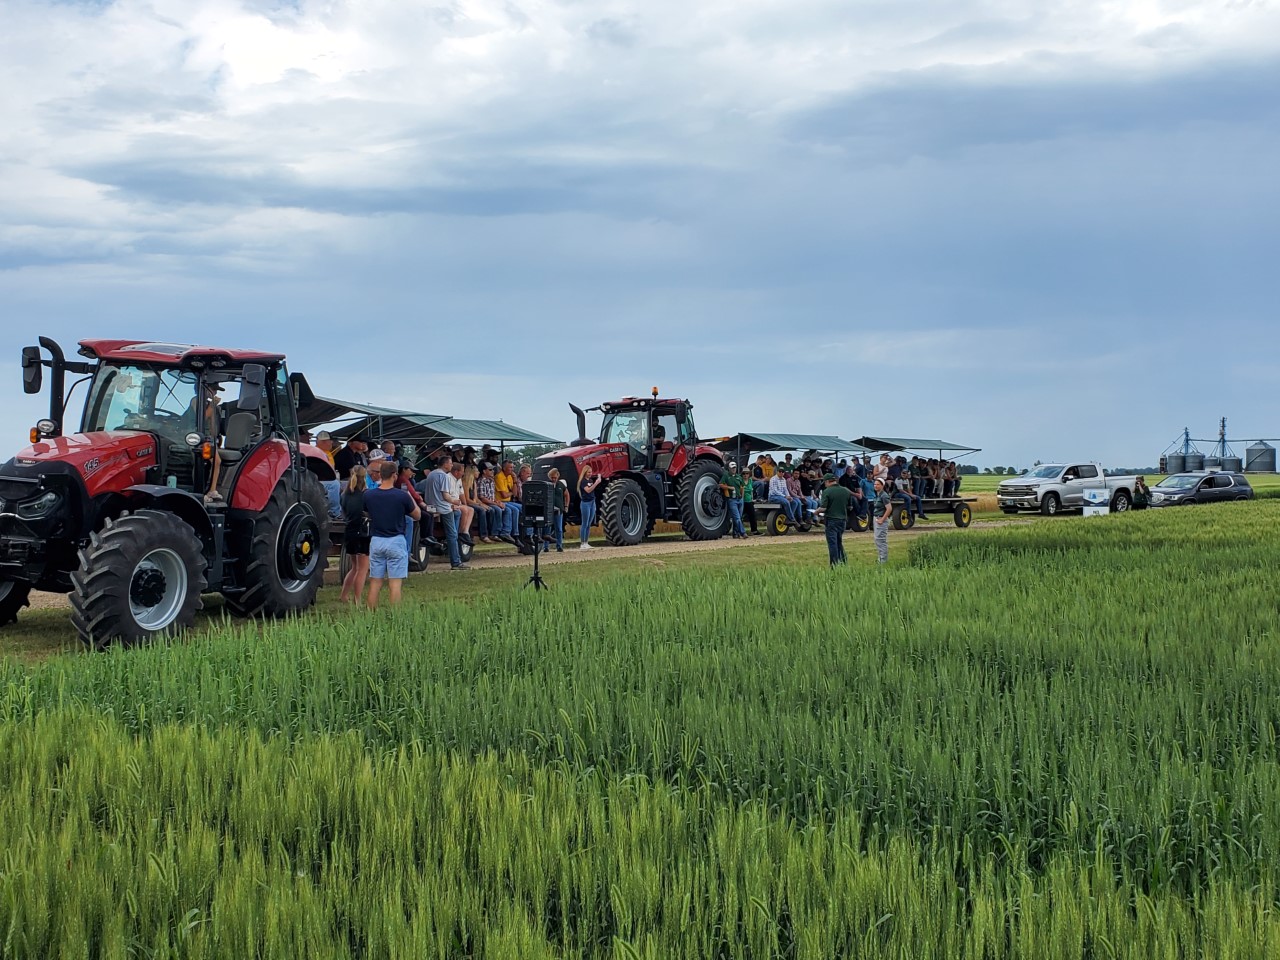 field day participants listen to agronomy experts